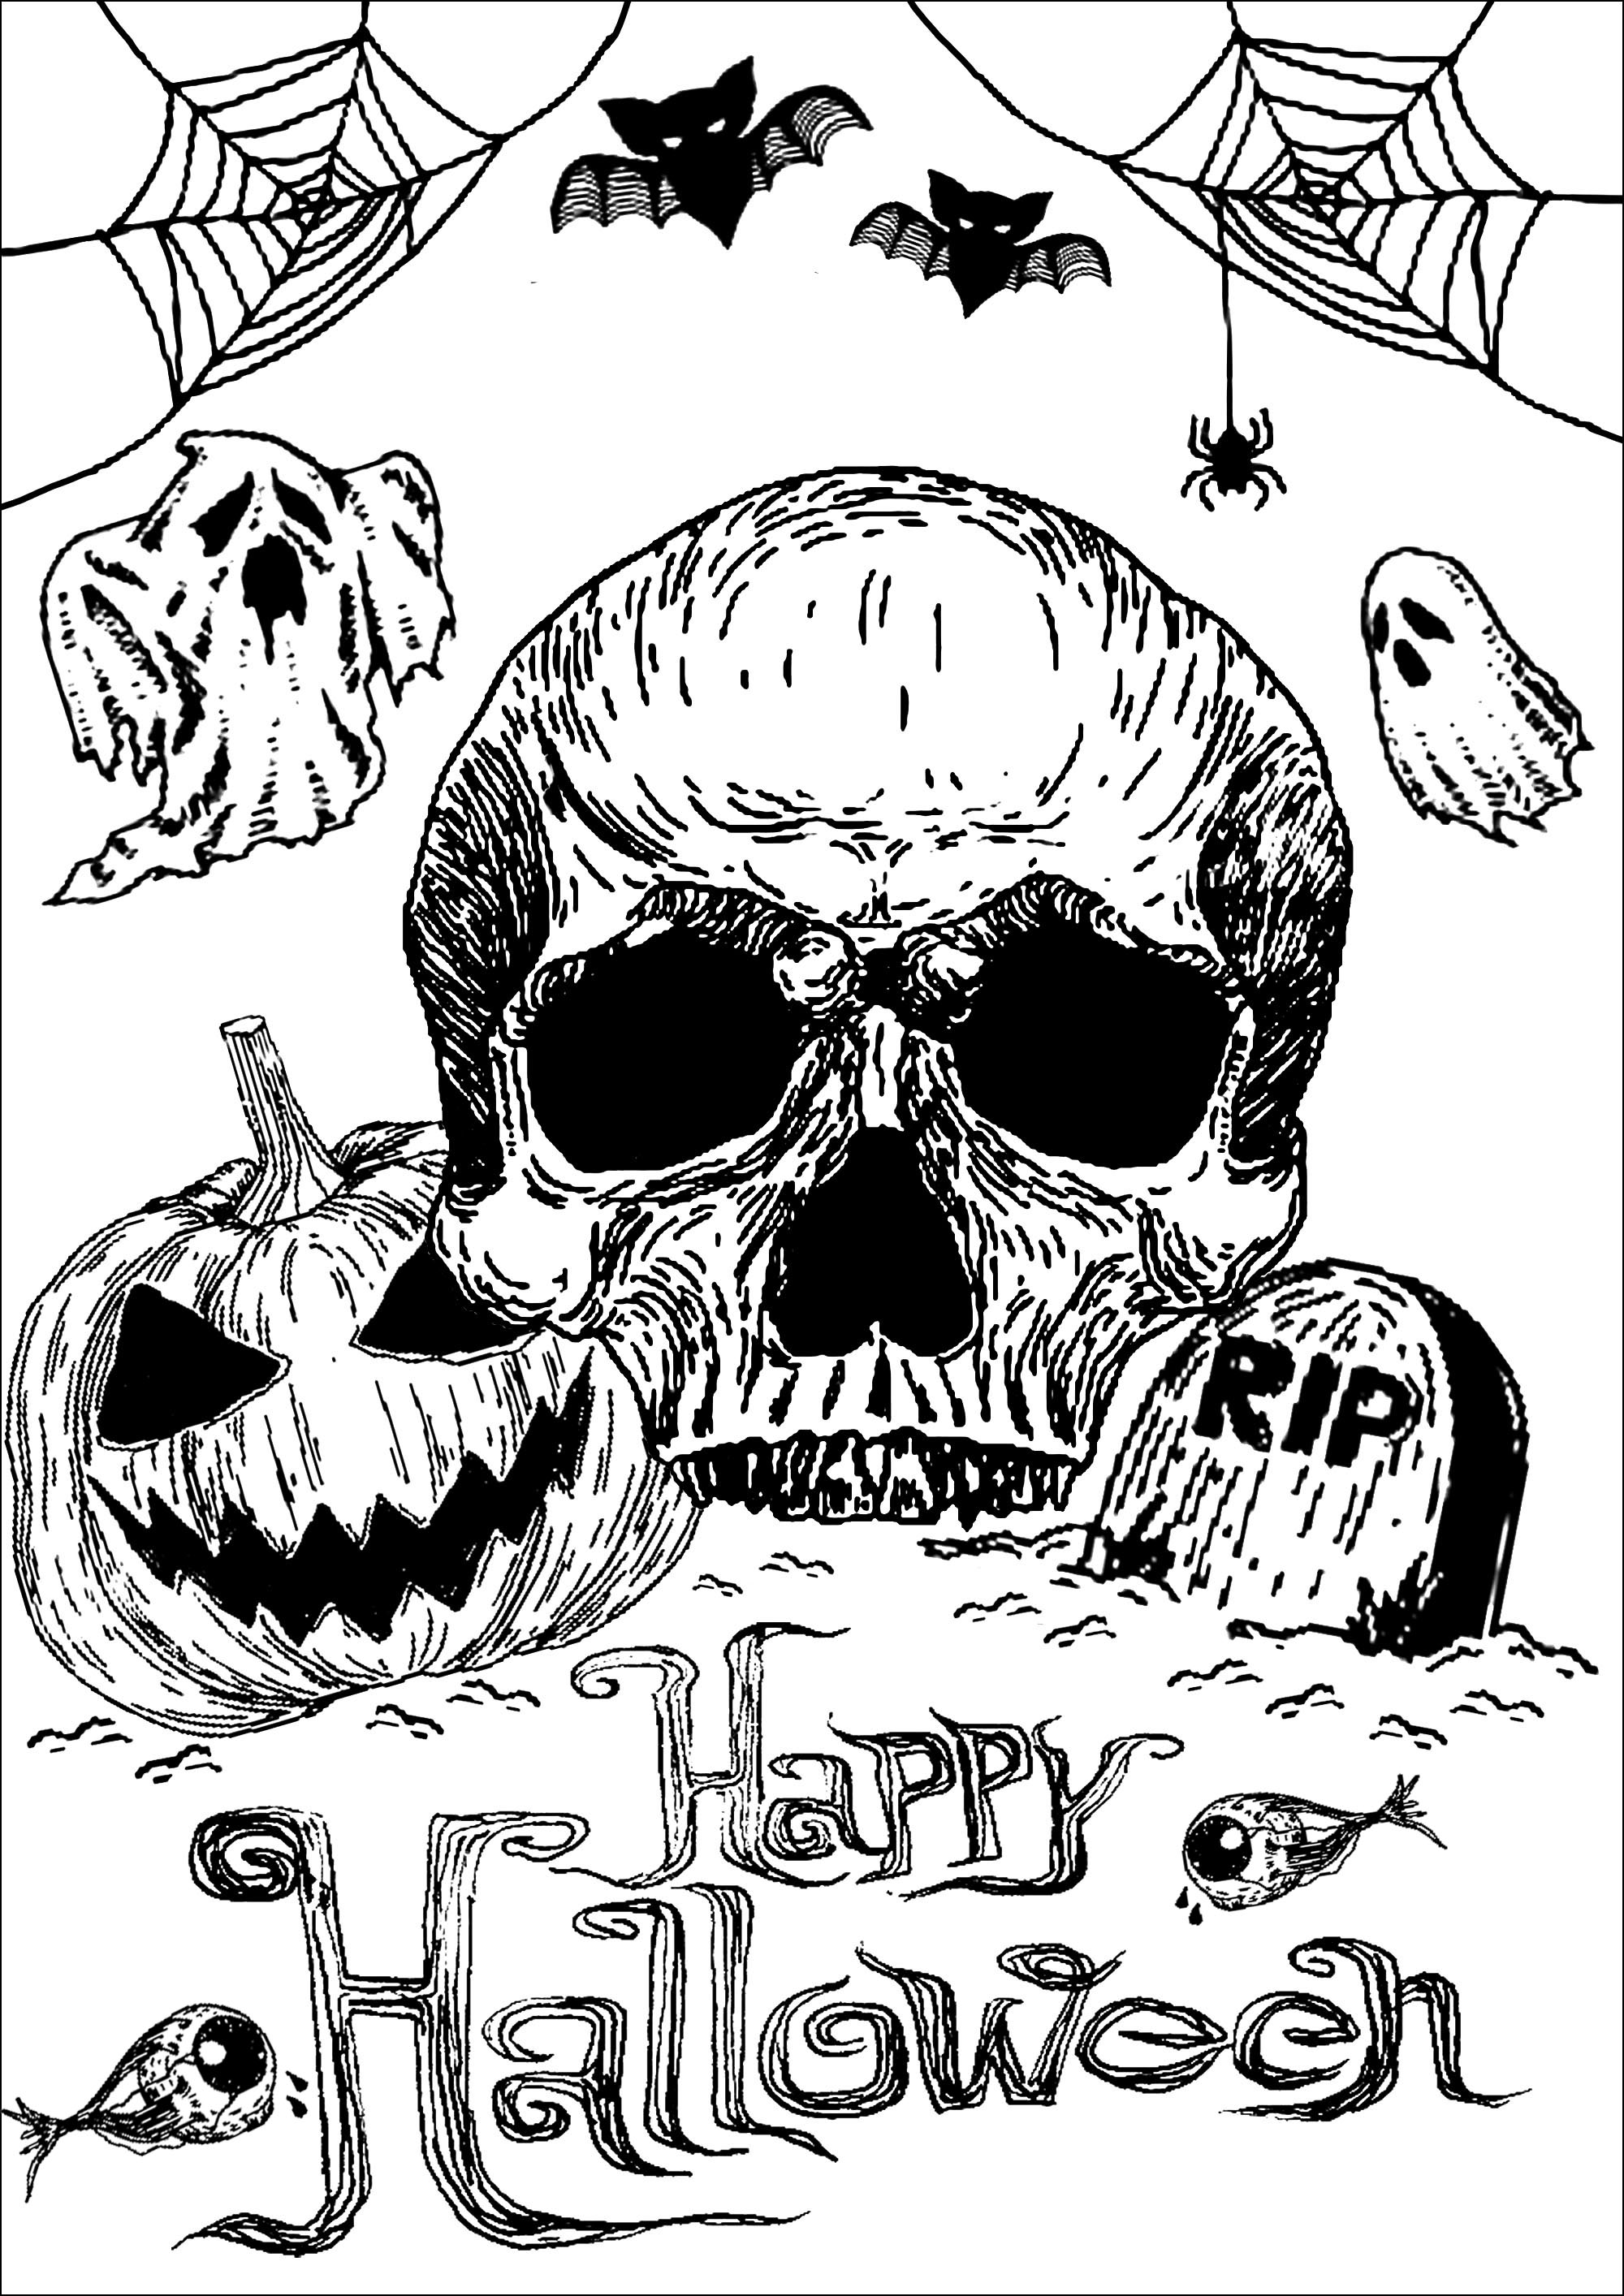 Color for Halloween this skull, this pumpkin and this grave ... accompanied by pretty ghosts, bats, cobwebs .., Artiste : Art'Isabelle